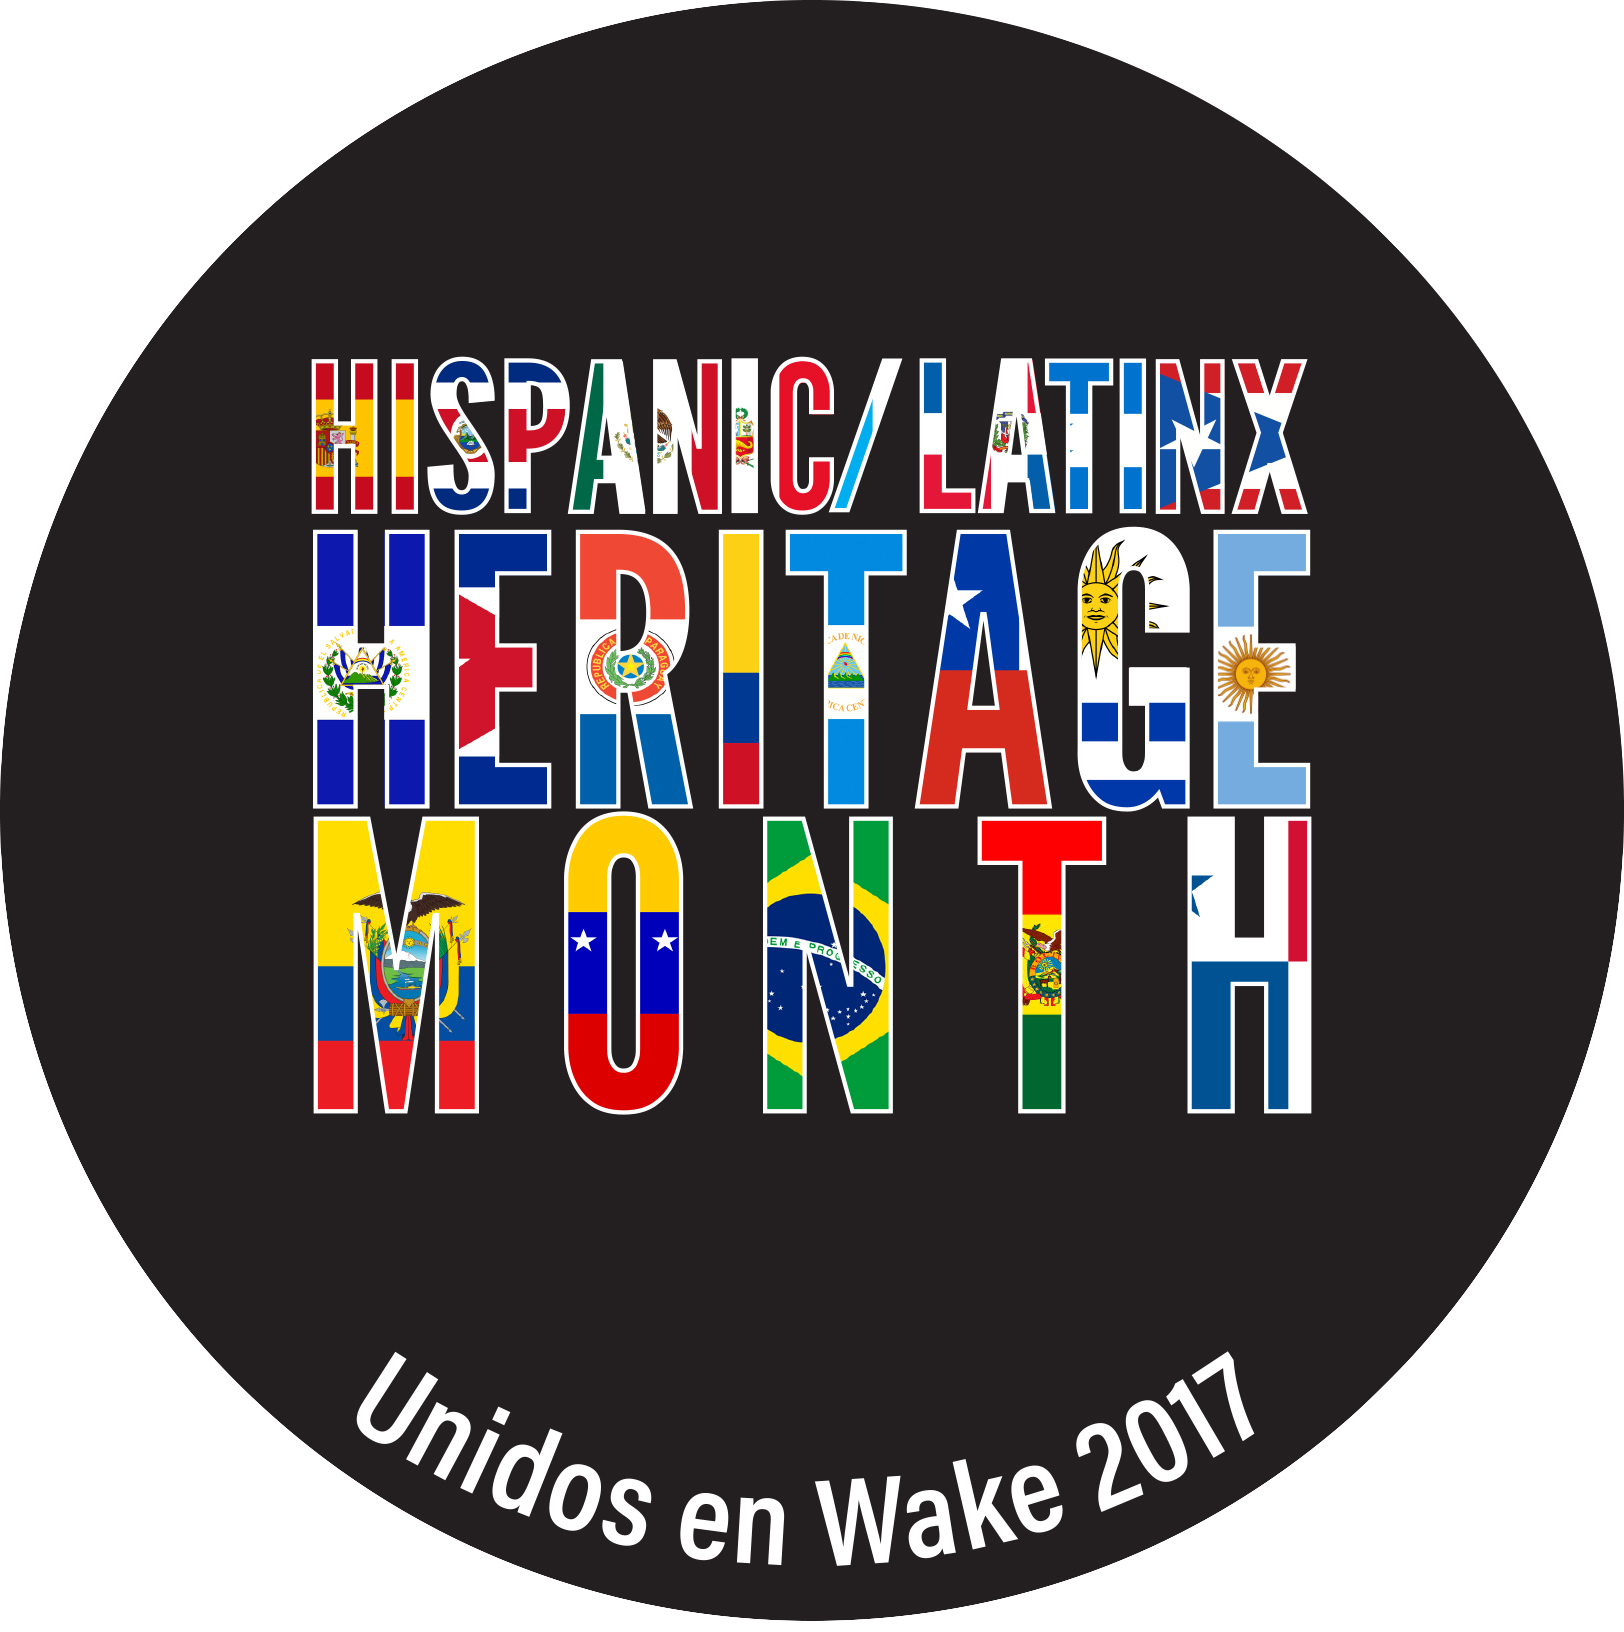 Hispanic/Latinx Heritage Month events, activities set for September, October Inside WFU news